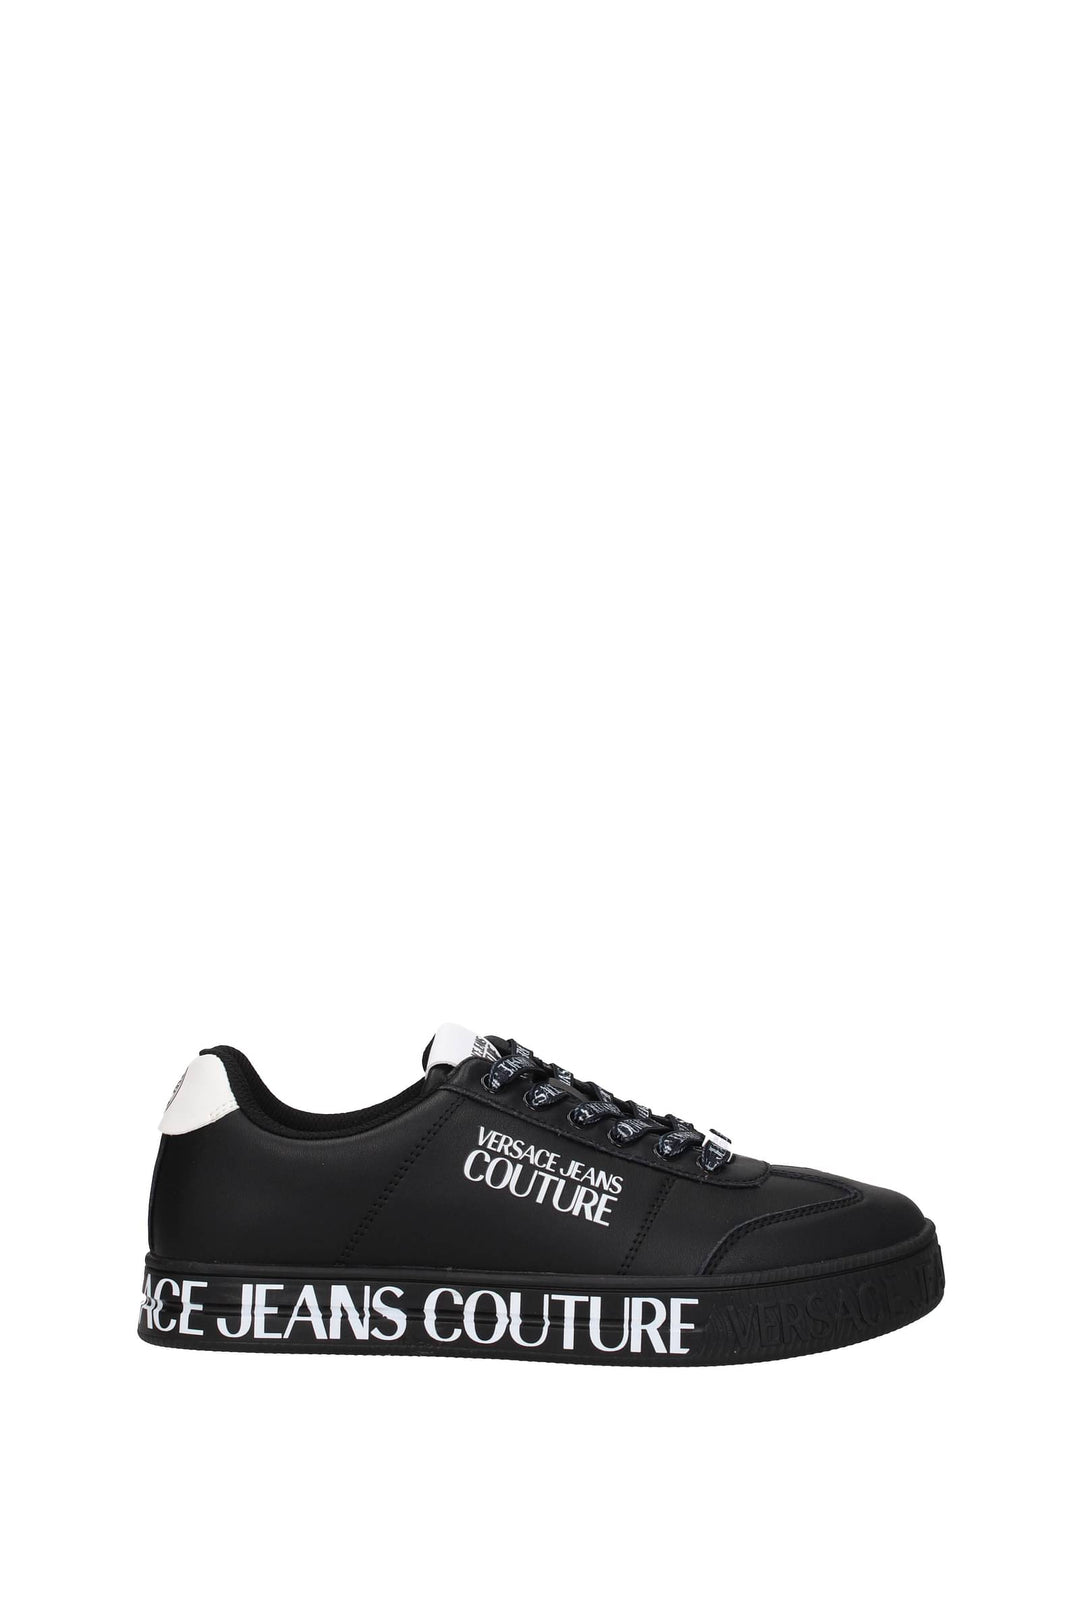 Versace Jeans Sneakers Couture Pelle Nero Bianco - Versace Jeans Couture - Uomo